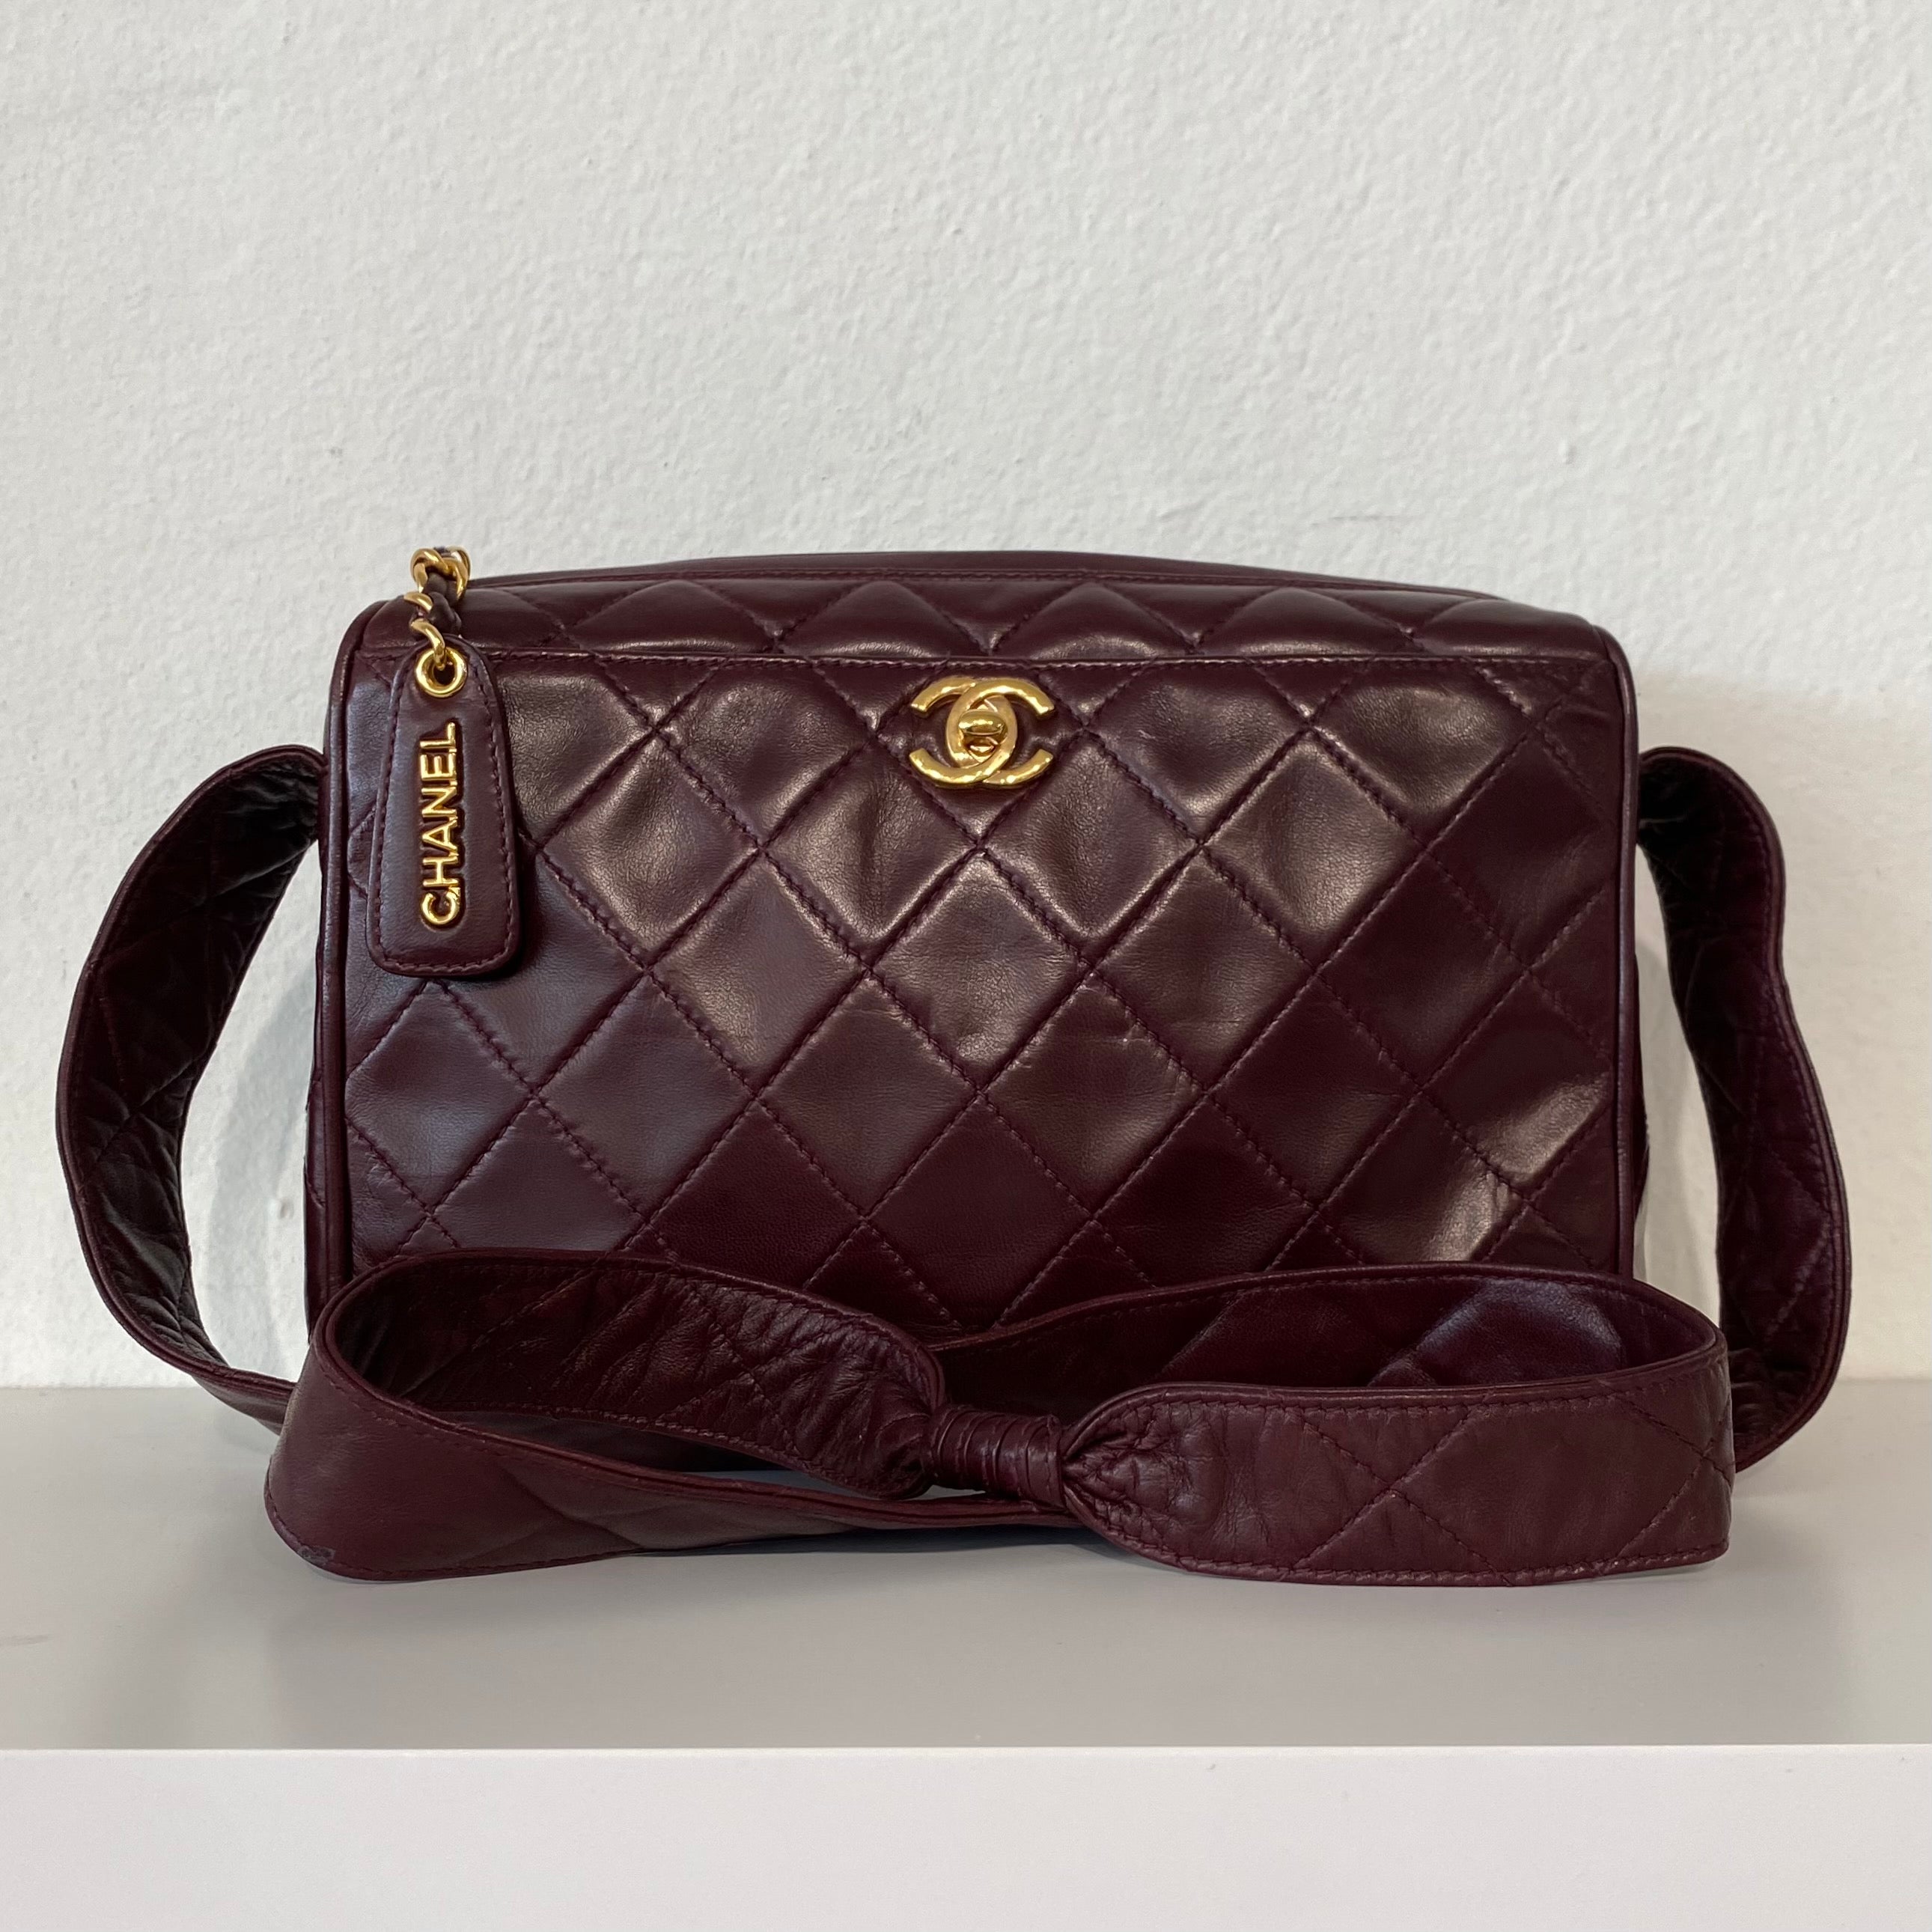 Cc delivery leather handbag Chanel Burgundy in Leather - 31921359